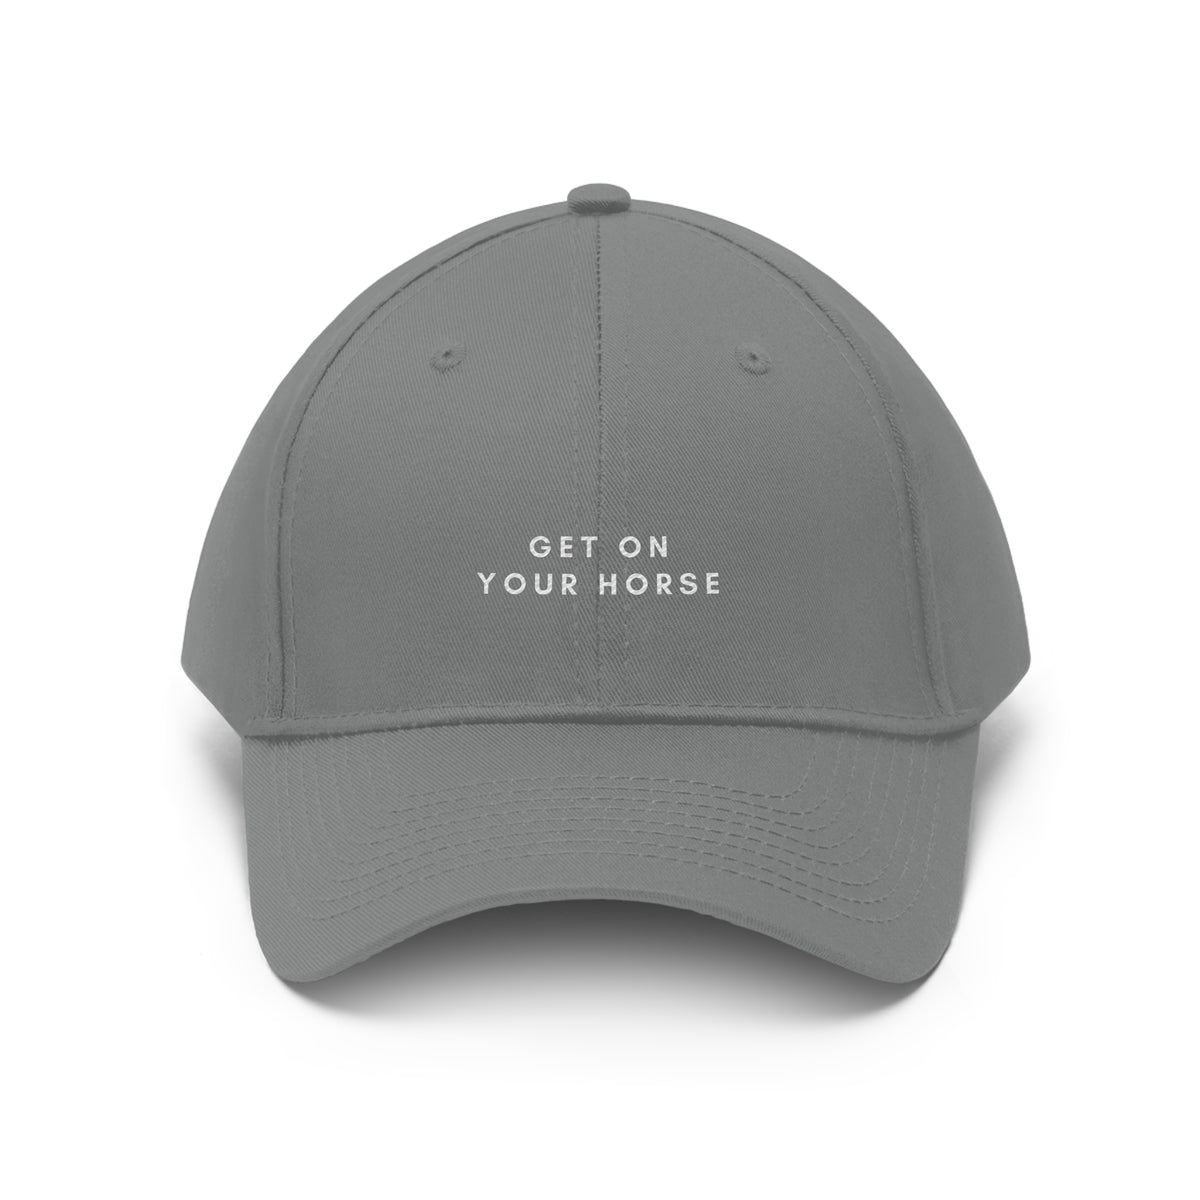 Sports Dad Hats, Cmon Ref, Rub Some Dirt On It, Get On Your Horse, Wheels